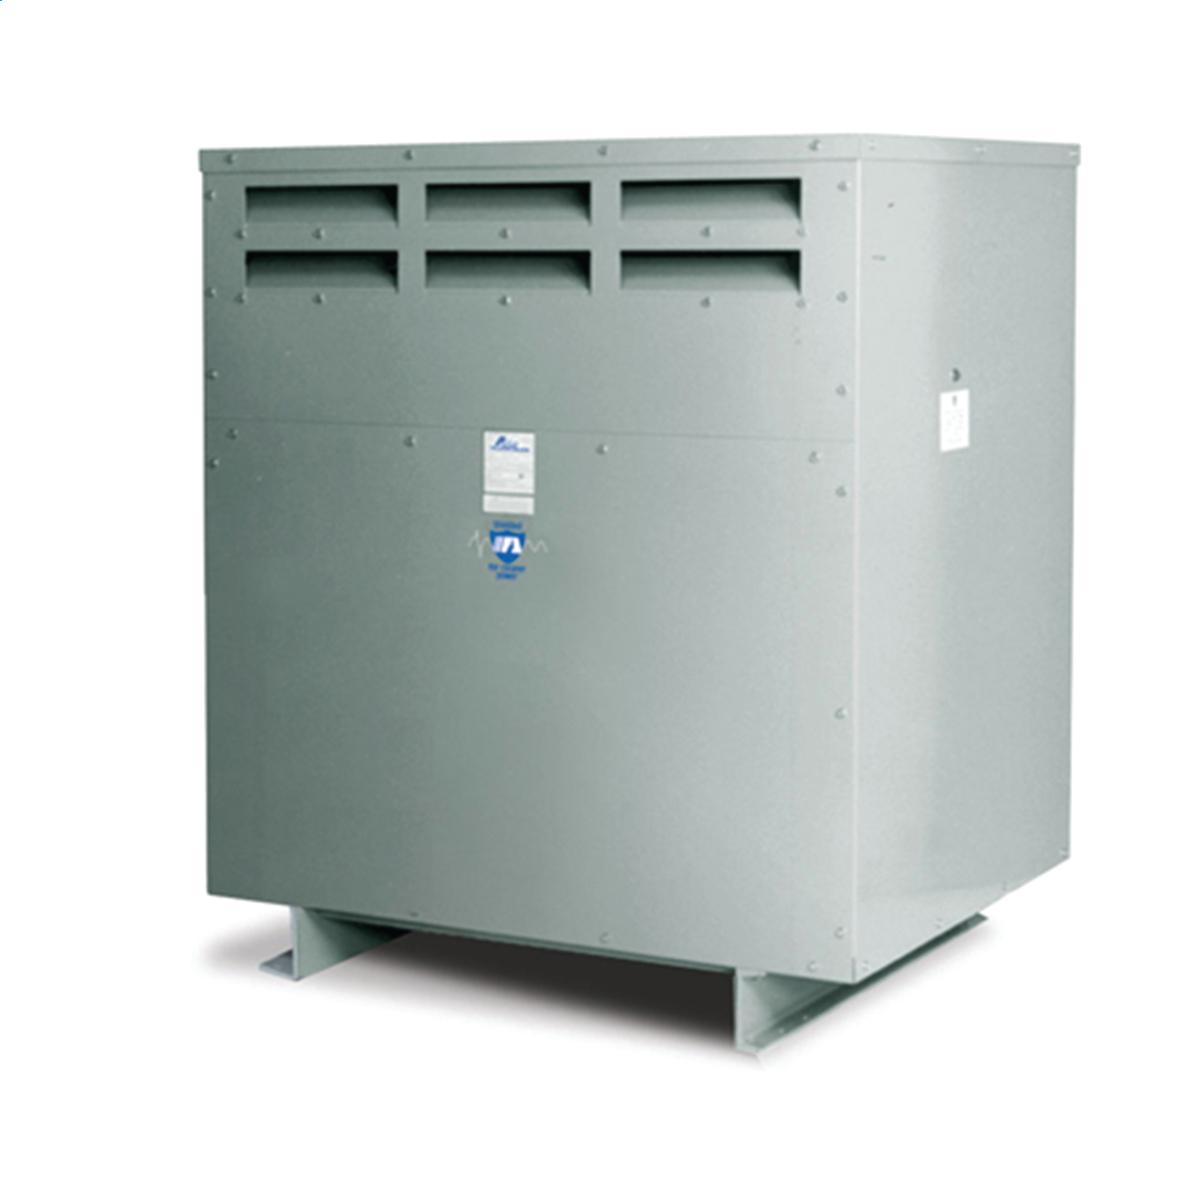 Hubbell WI002M14 Medium Voltage Transformer - Three Phase, 2400Δ - 600ΔV, 2000kVA  ; Lower operating cost over Liquid-filled ; No additional fireproofing or venting ; Long life expectancy ; Smaller, lighter easy to maintain